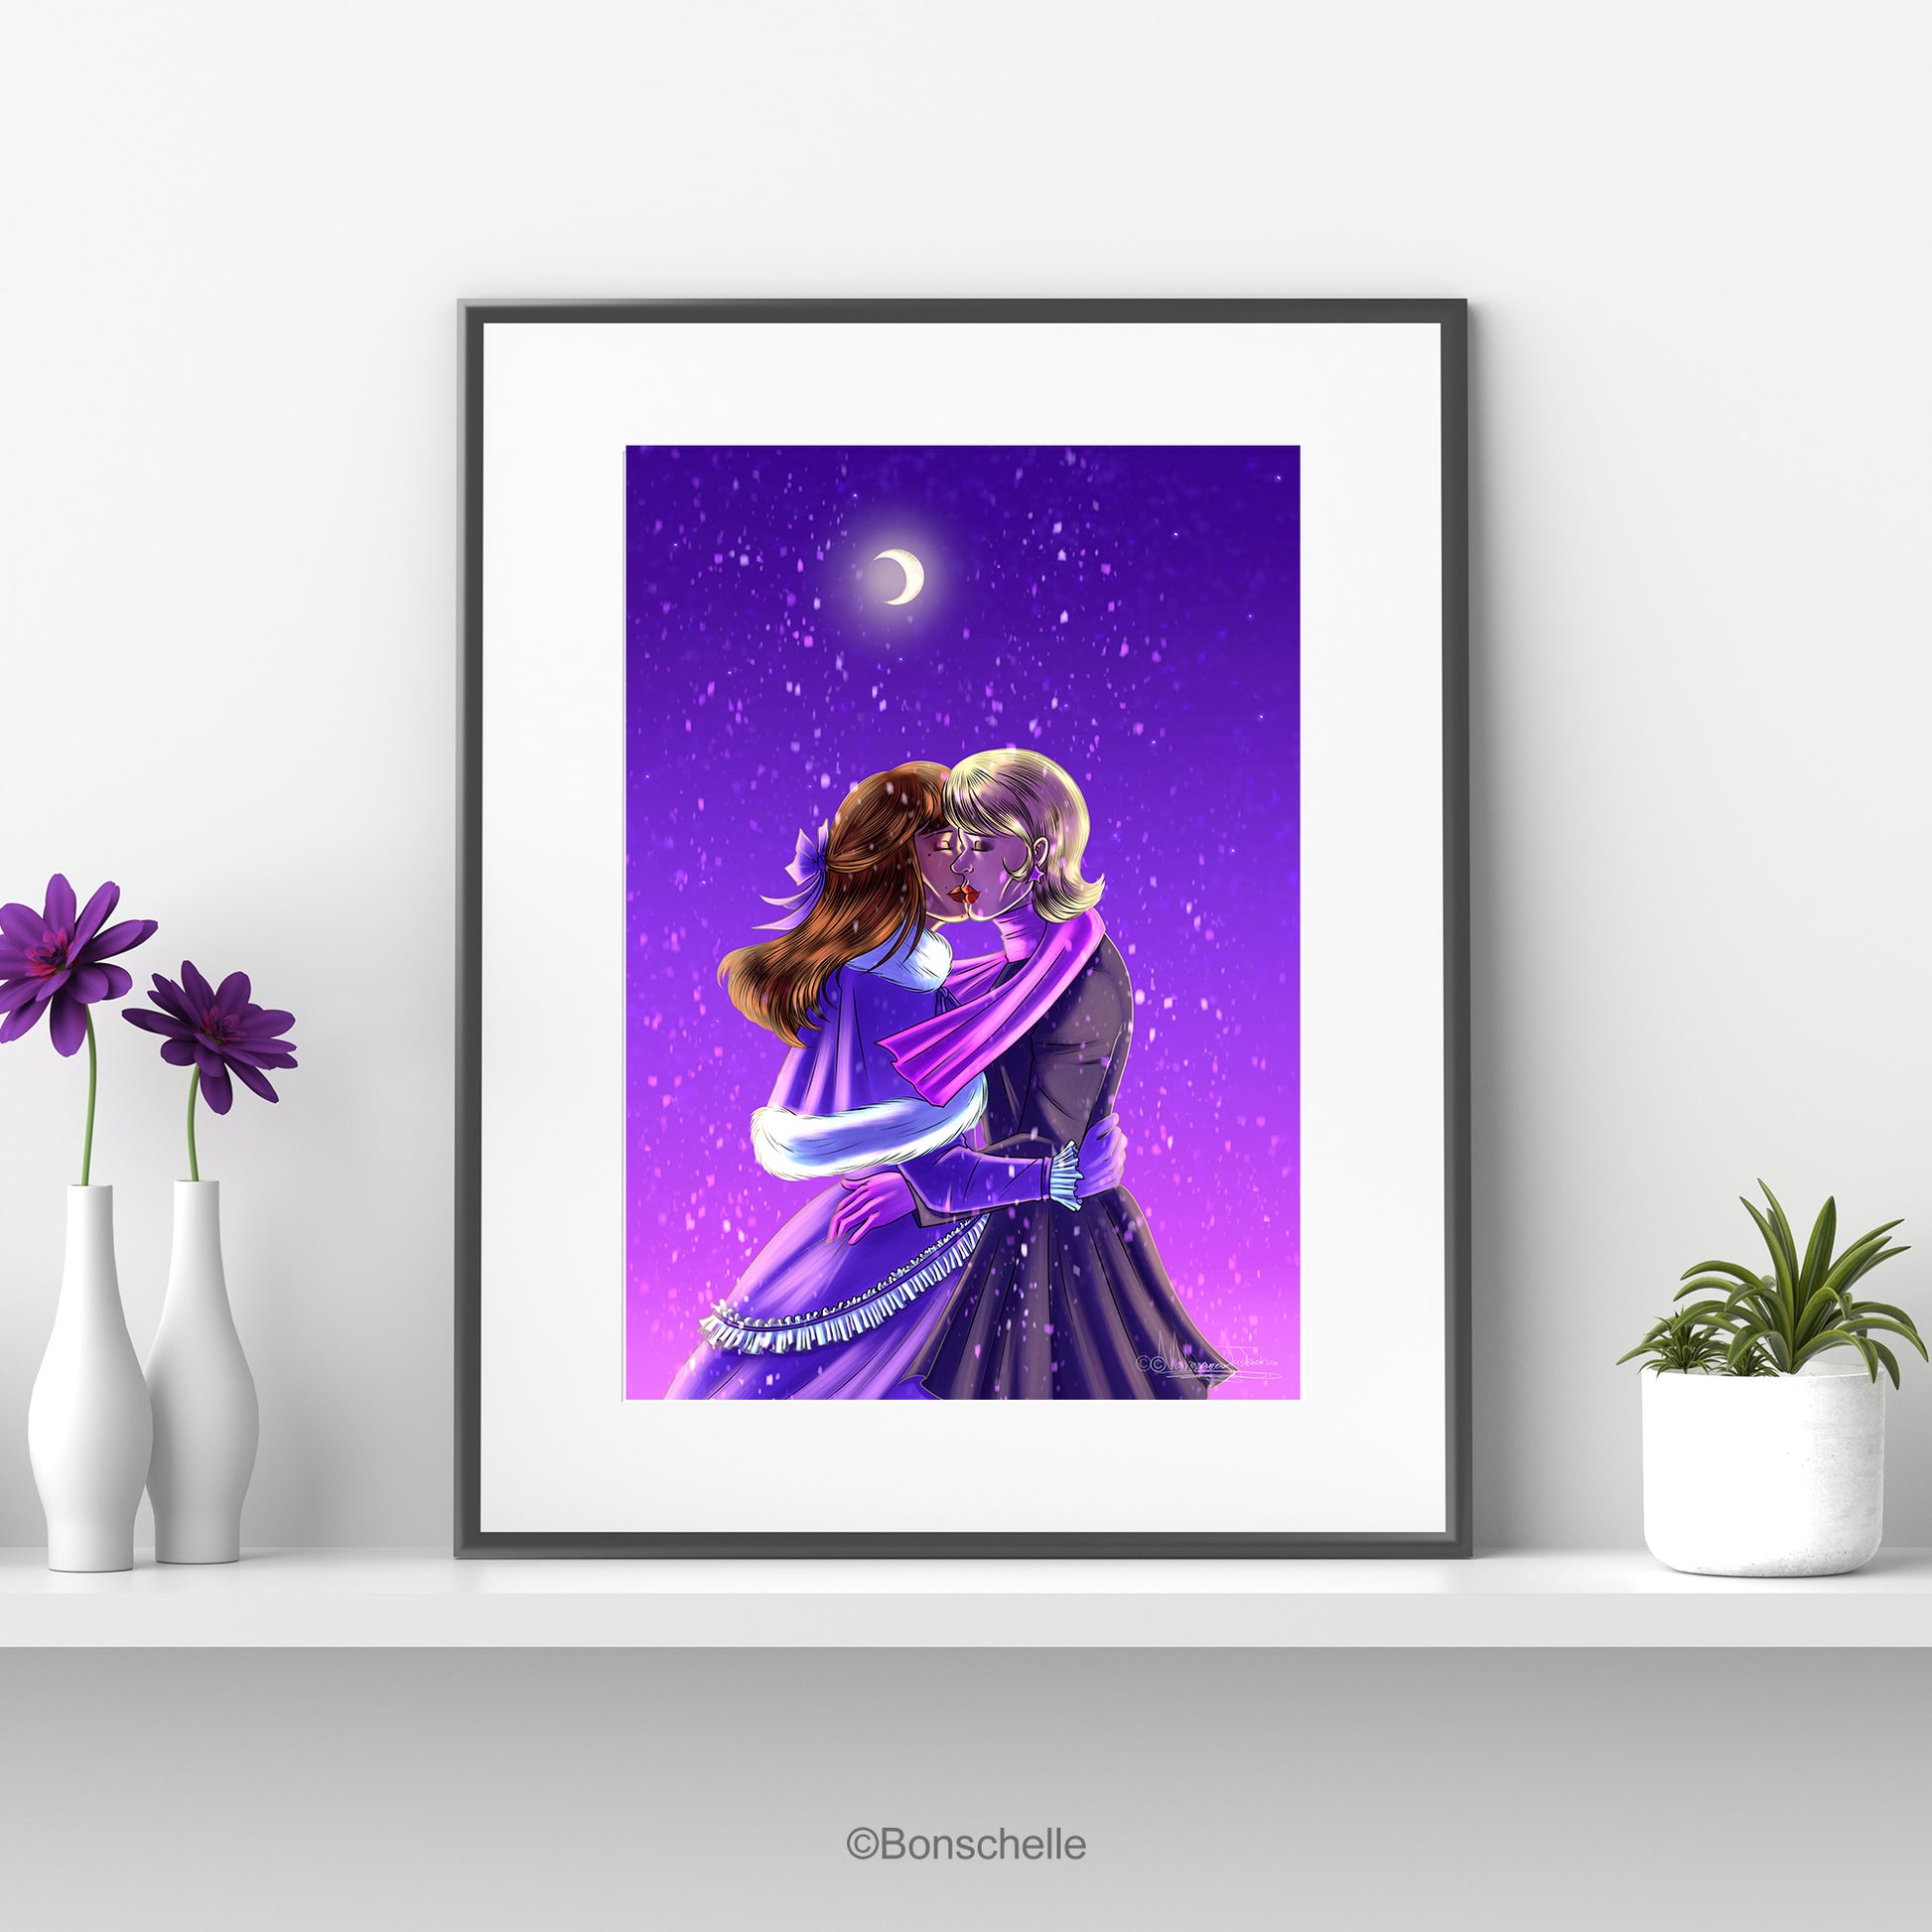 An original art print showing two young woman sharing a kiss in the snow against a purple night sky. A crescent moon is overhead.  The print is mounted on a white surround and framed in black. It sits on a white shelf. One one side are flower vases, on the other a flower pot with a cactus.